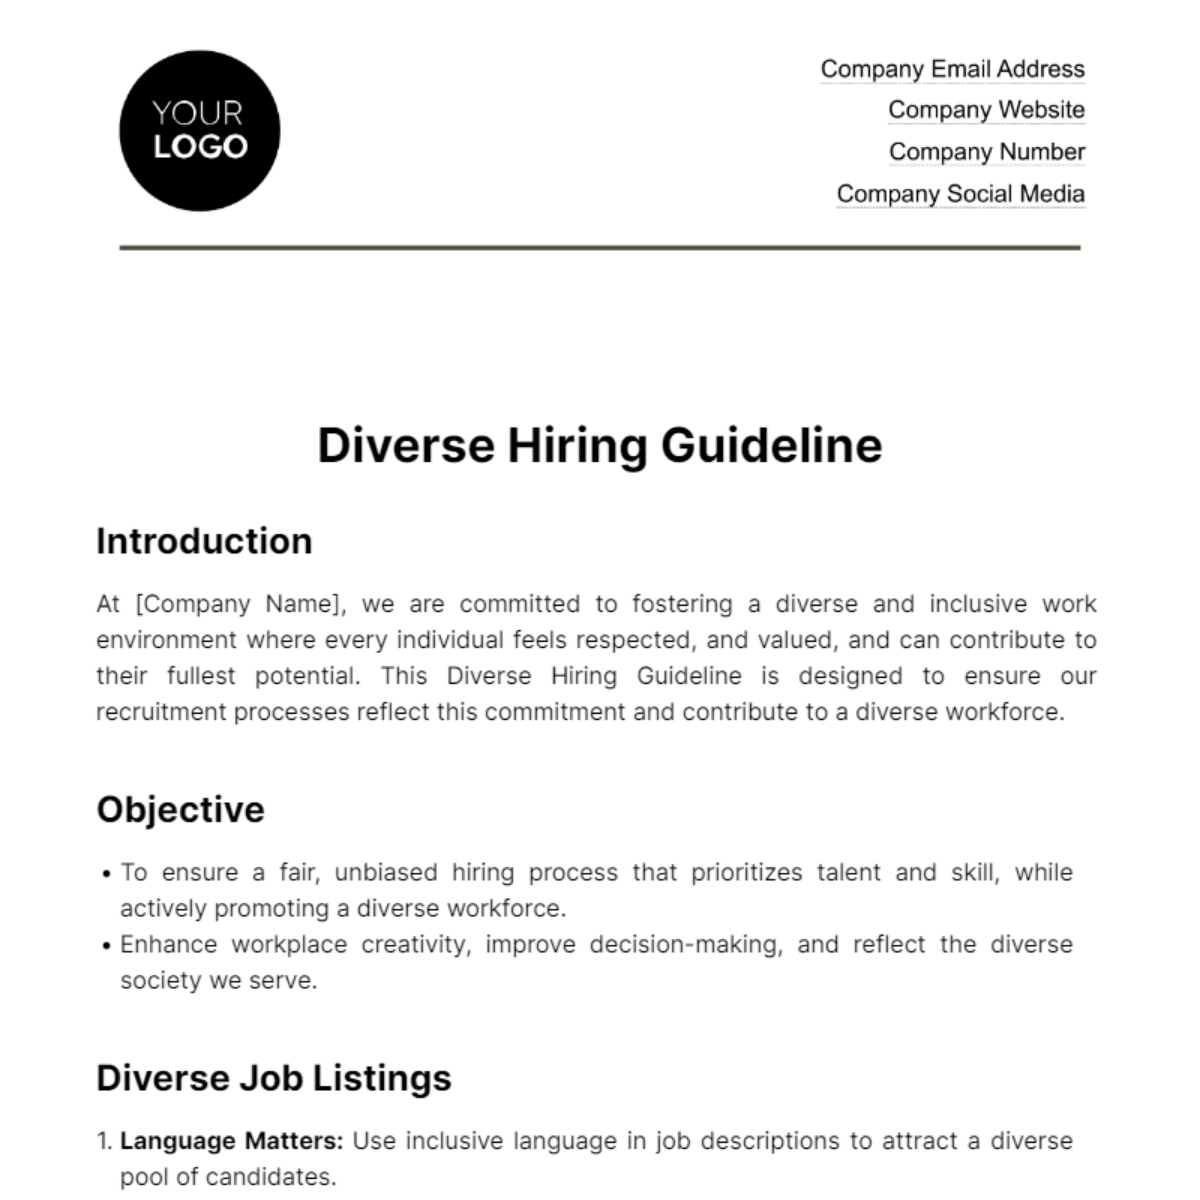 Free Diverse Hiring Guideline HR Template